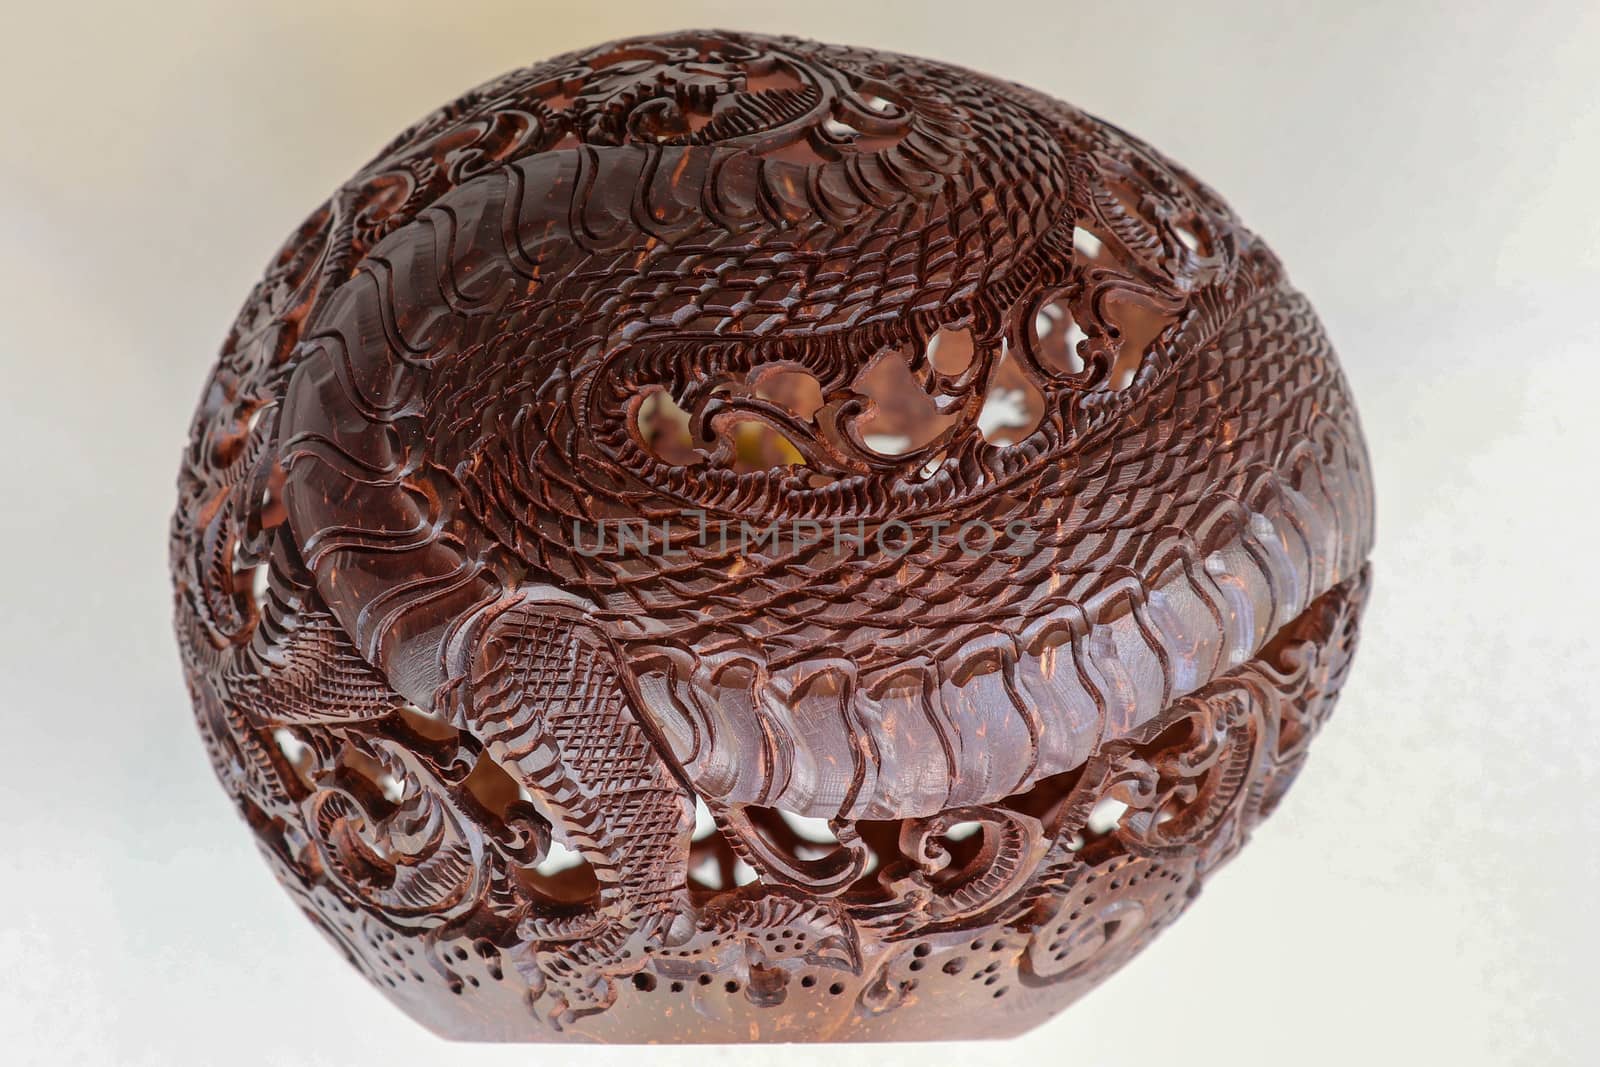 Close up ornamental shell for candle. Carved Souvenir from Coconut. Traditional handicraft on Bali, Indonesia. Hand carved ornaments with animal and plant motifs on the coconut shell. Mystical dragon.